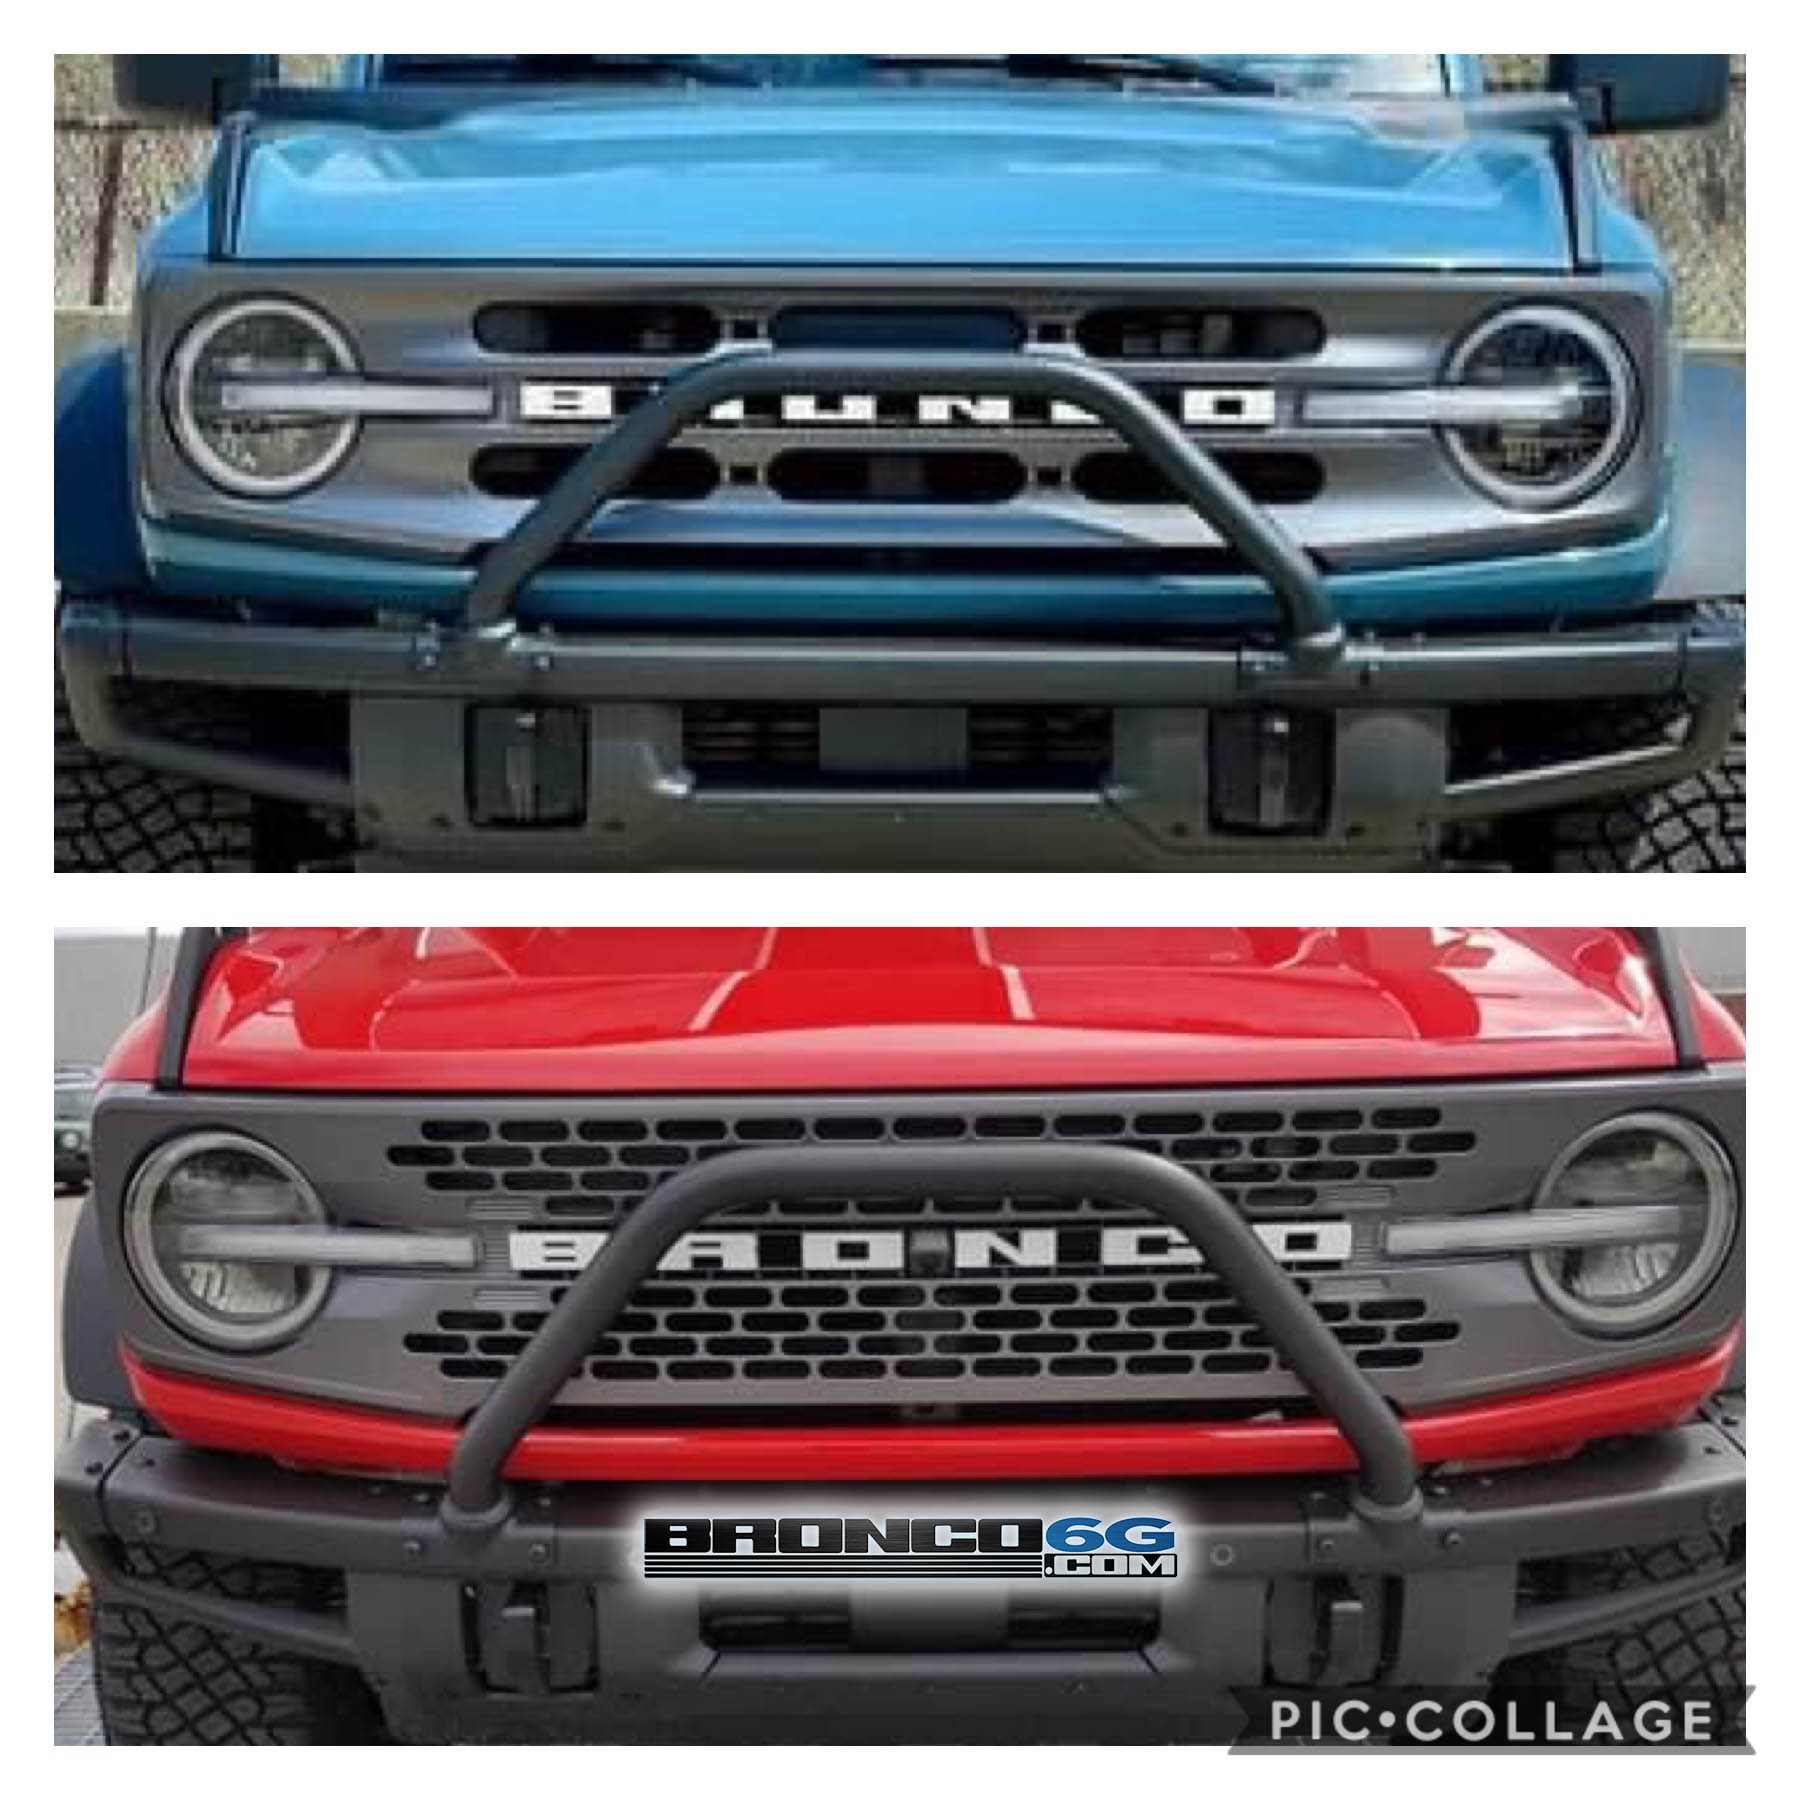 Ford Bronco New Improved Brush Guard / Bull Bar Design and Location on Race Red Bronco Badlands! 2021-Ford-Bronco-Badlands-Race-Red-Exterior-001-Front3